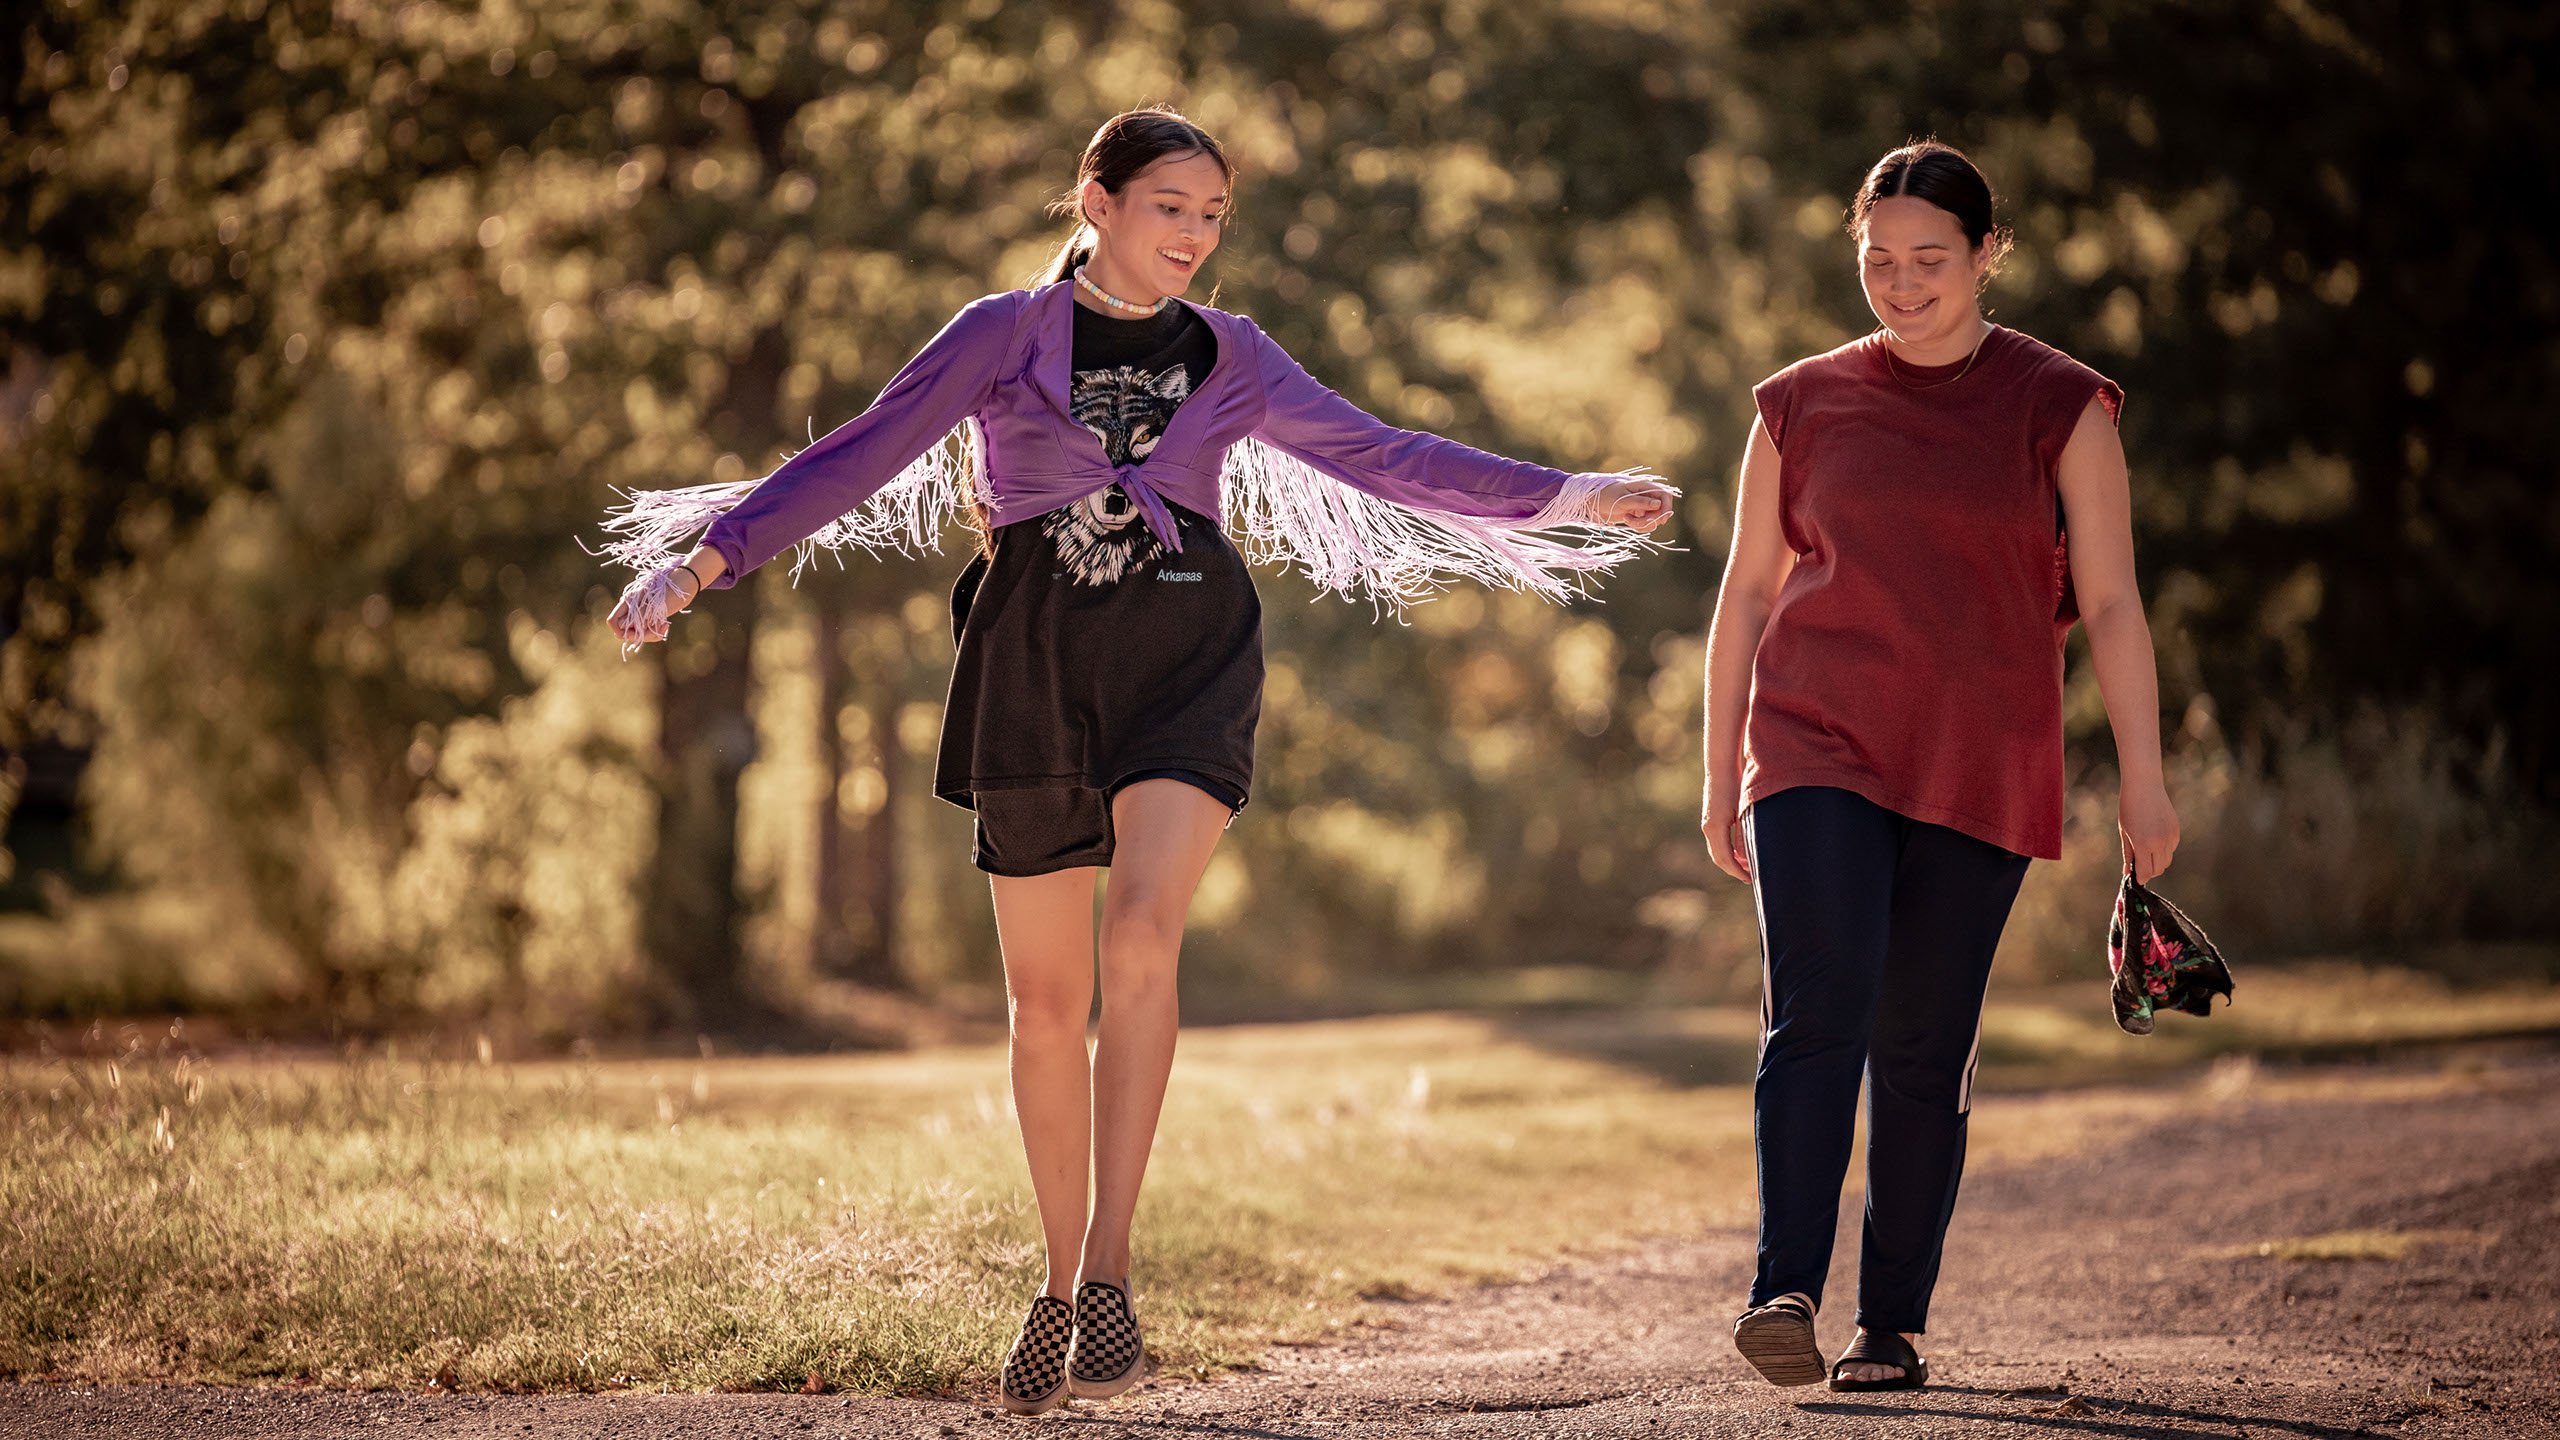 An Indigenous girl in a purple sweater spreads her arms while walking down a green lane with a thirtysomething woman played by Lily Gladstone in Fancy Dance. The festival also includes Fancy Dance, National Anthem, The Promised Land, and more.